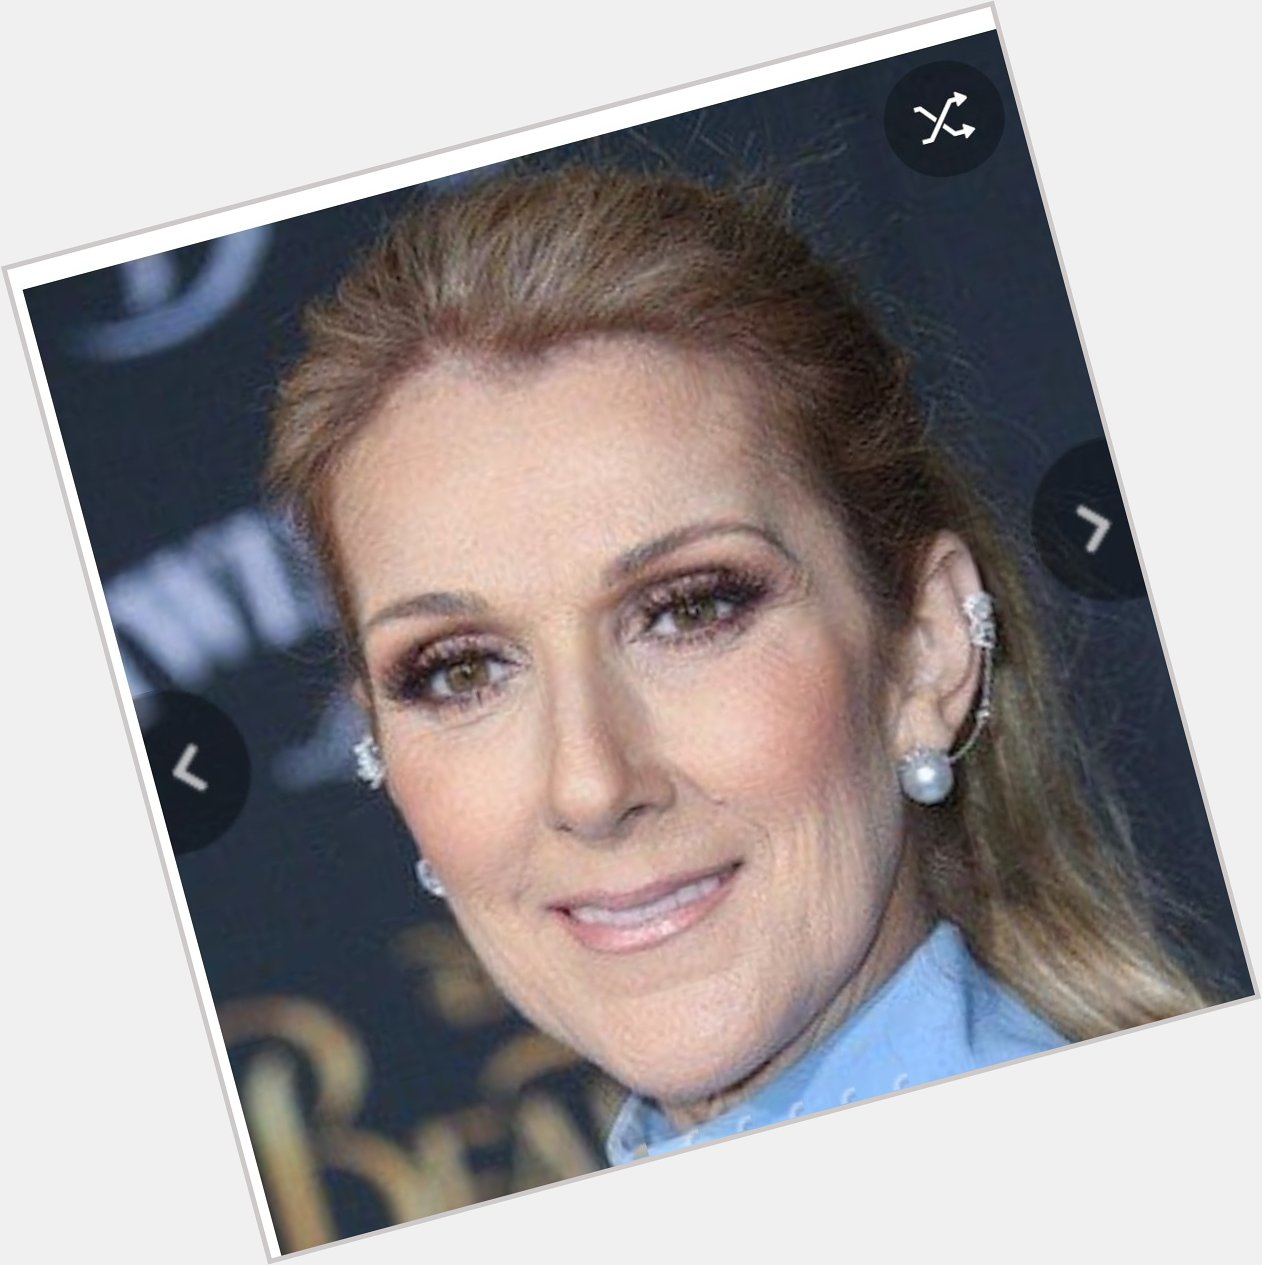 Happy Birthday to this fabulous singer. Happy Birthday to Celine Dion 